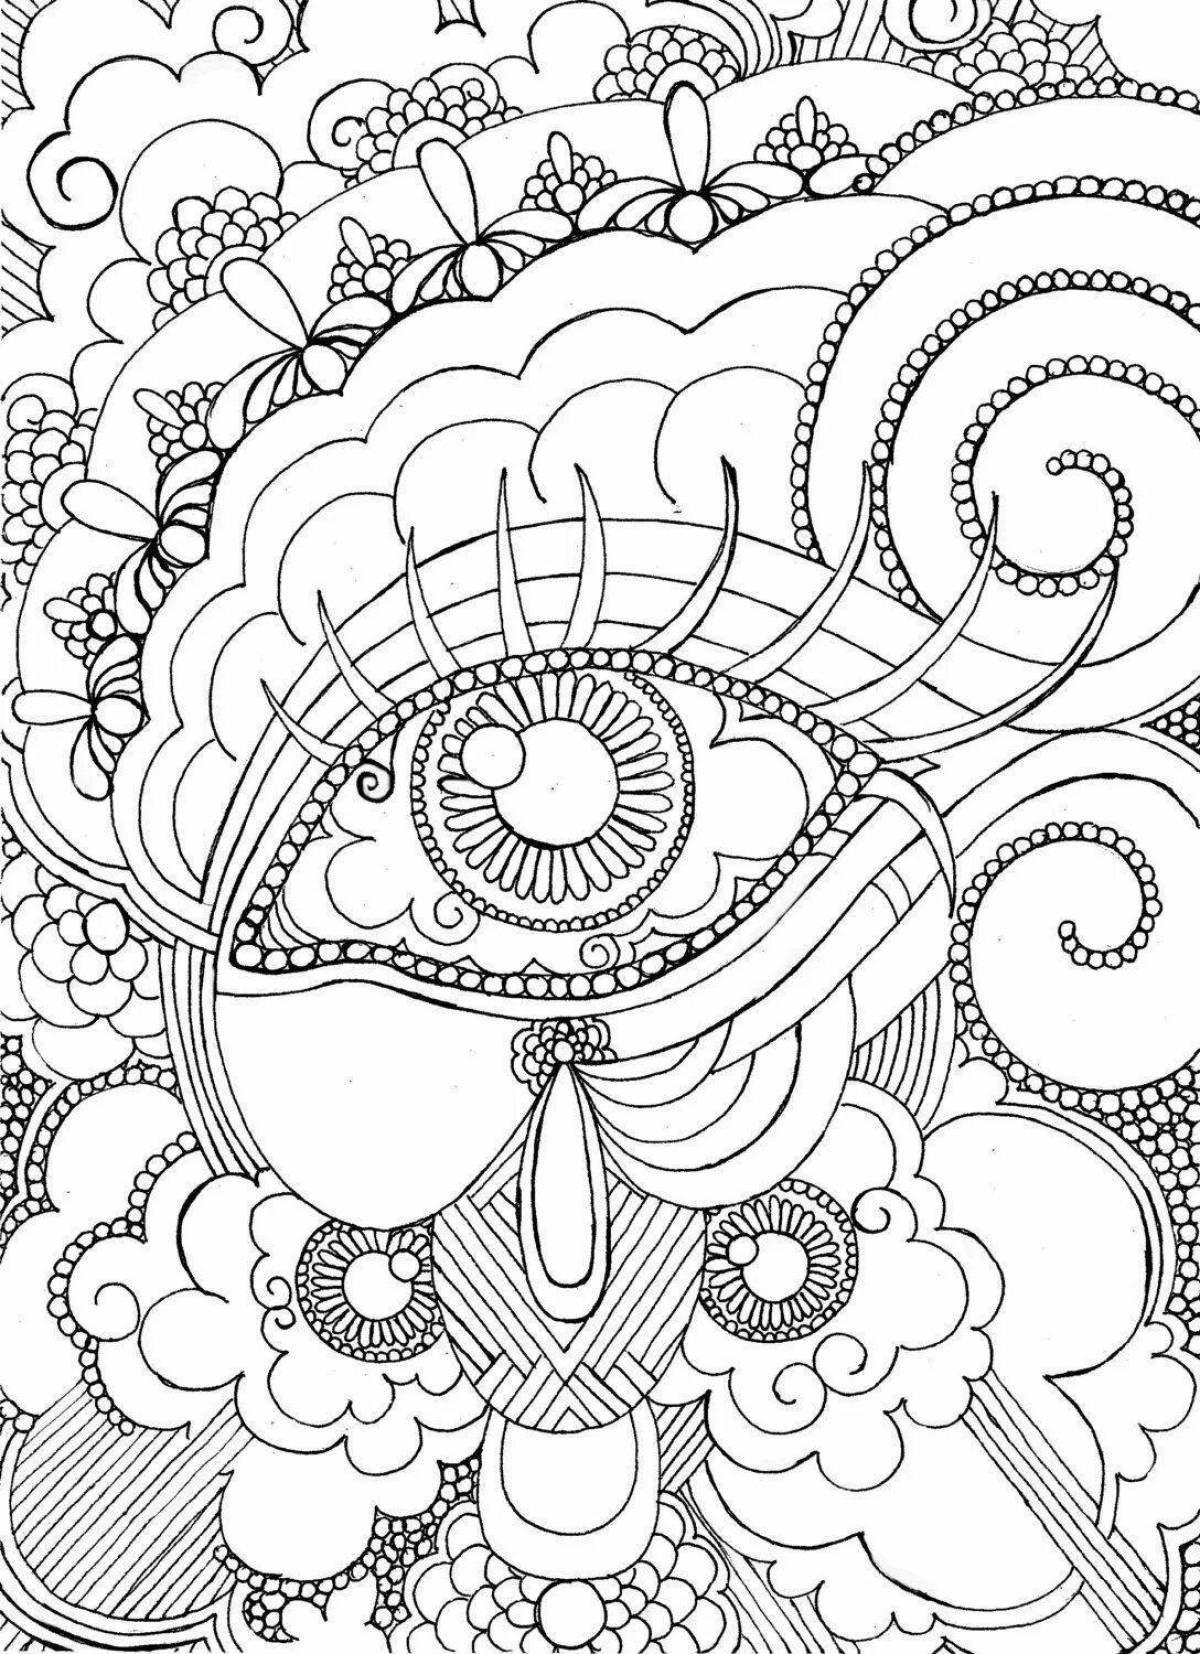 Inspirational adult lung coloring book